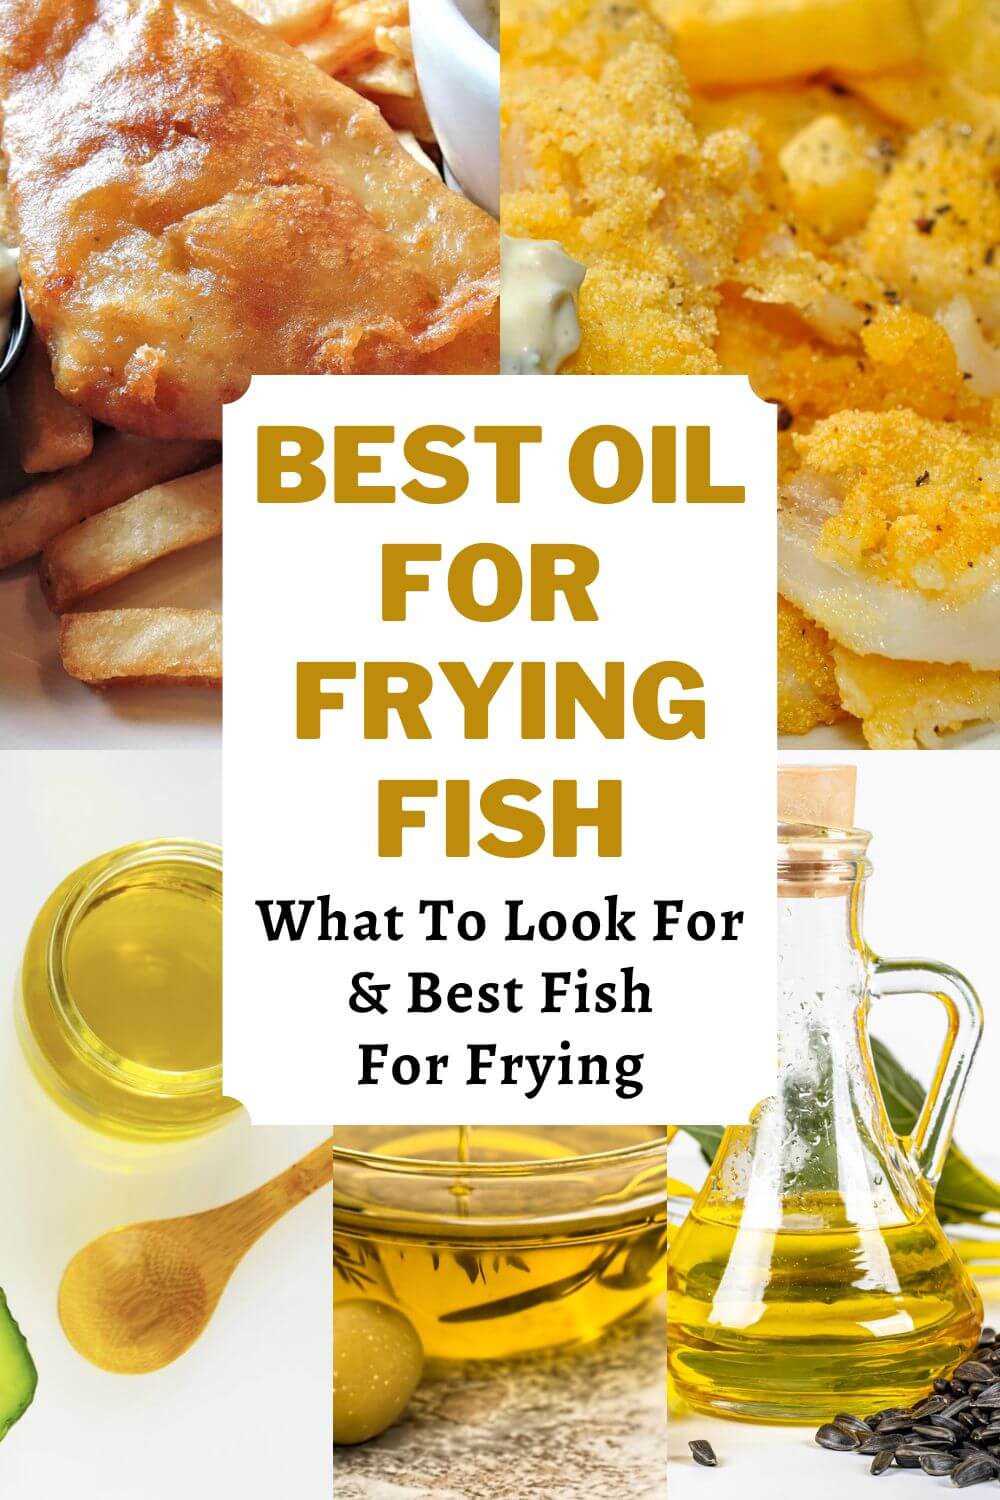 Best Oil For Frying Fish